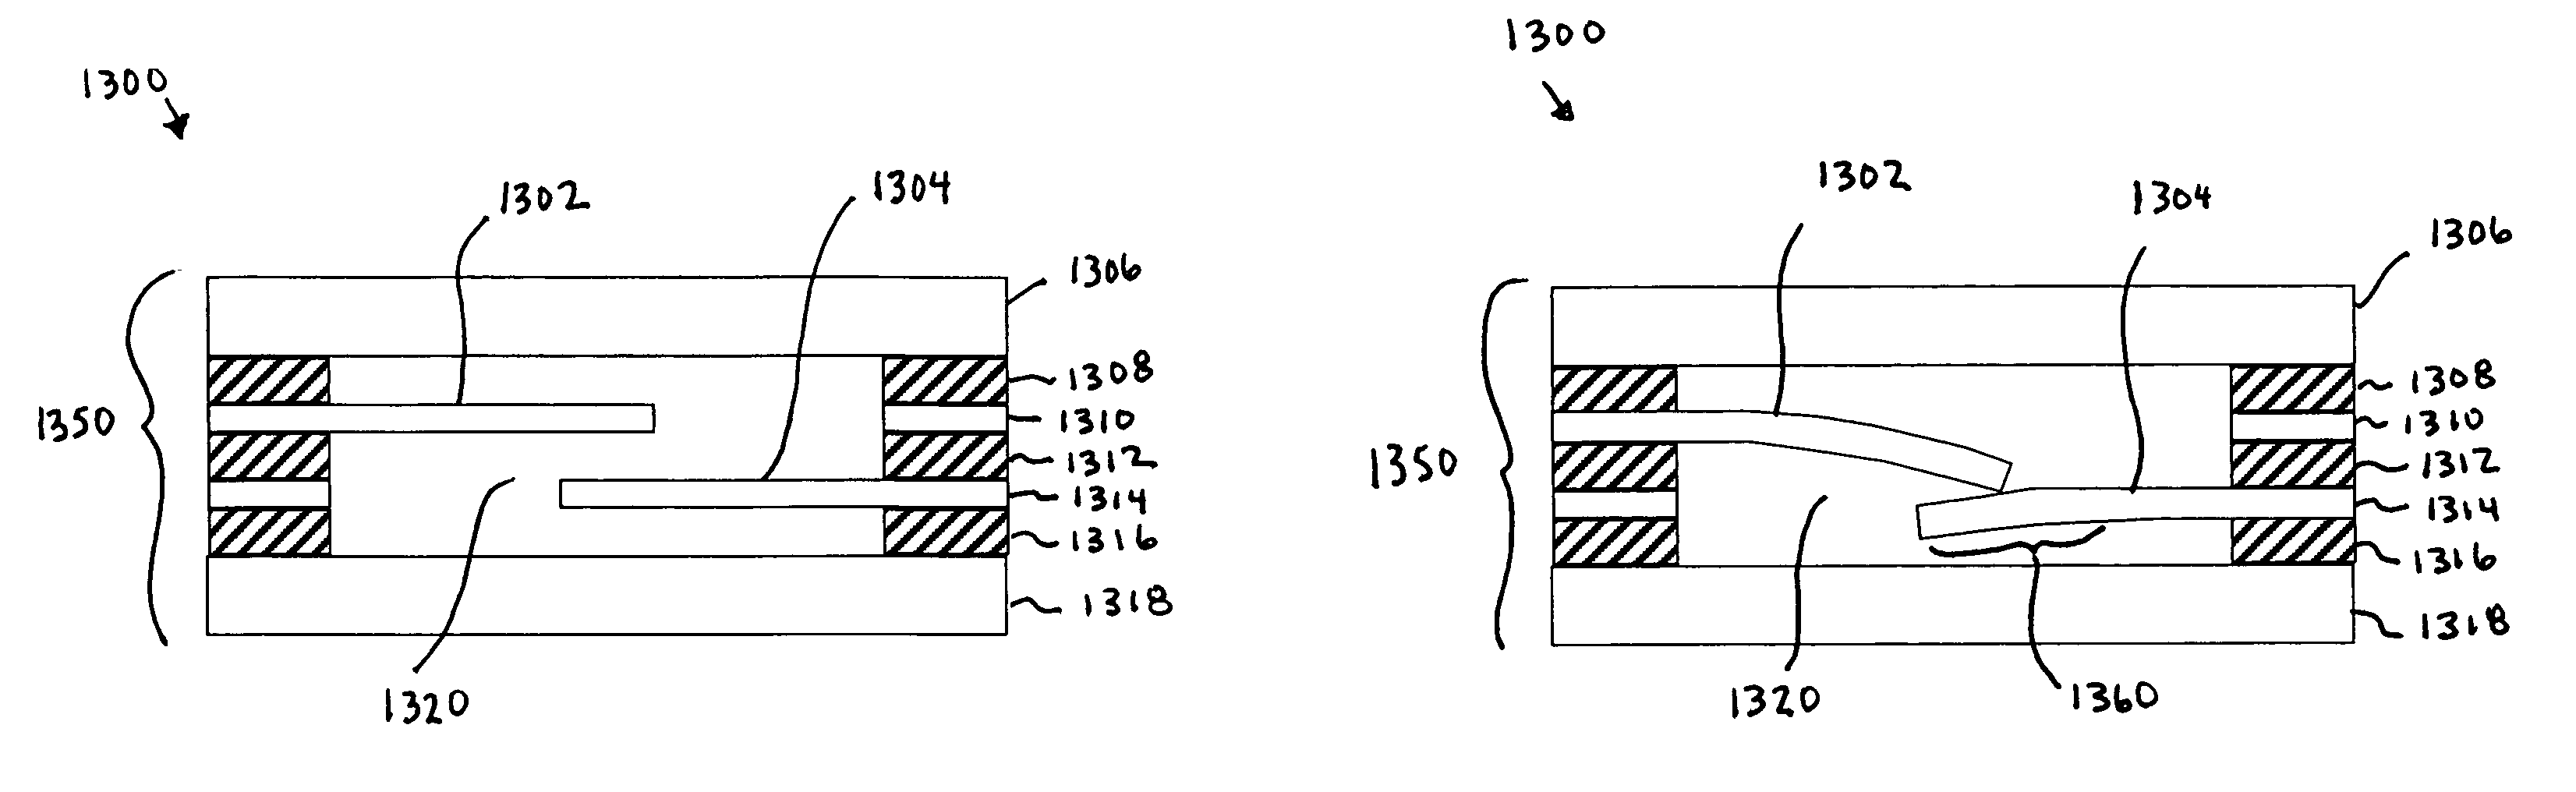 Laminated relays with multiple flexible contacts